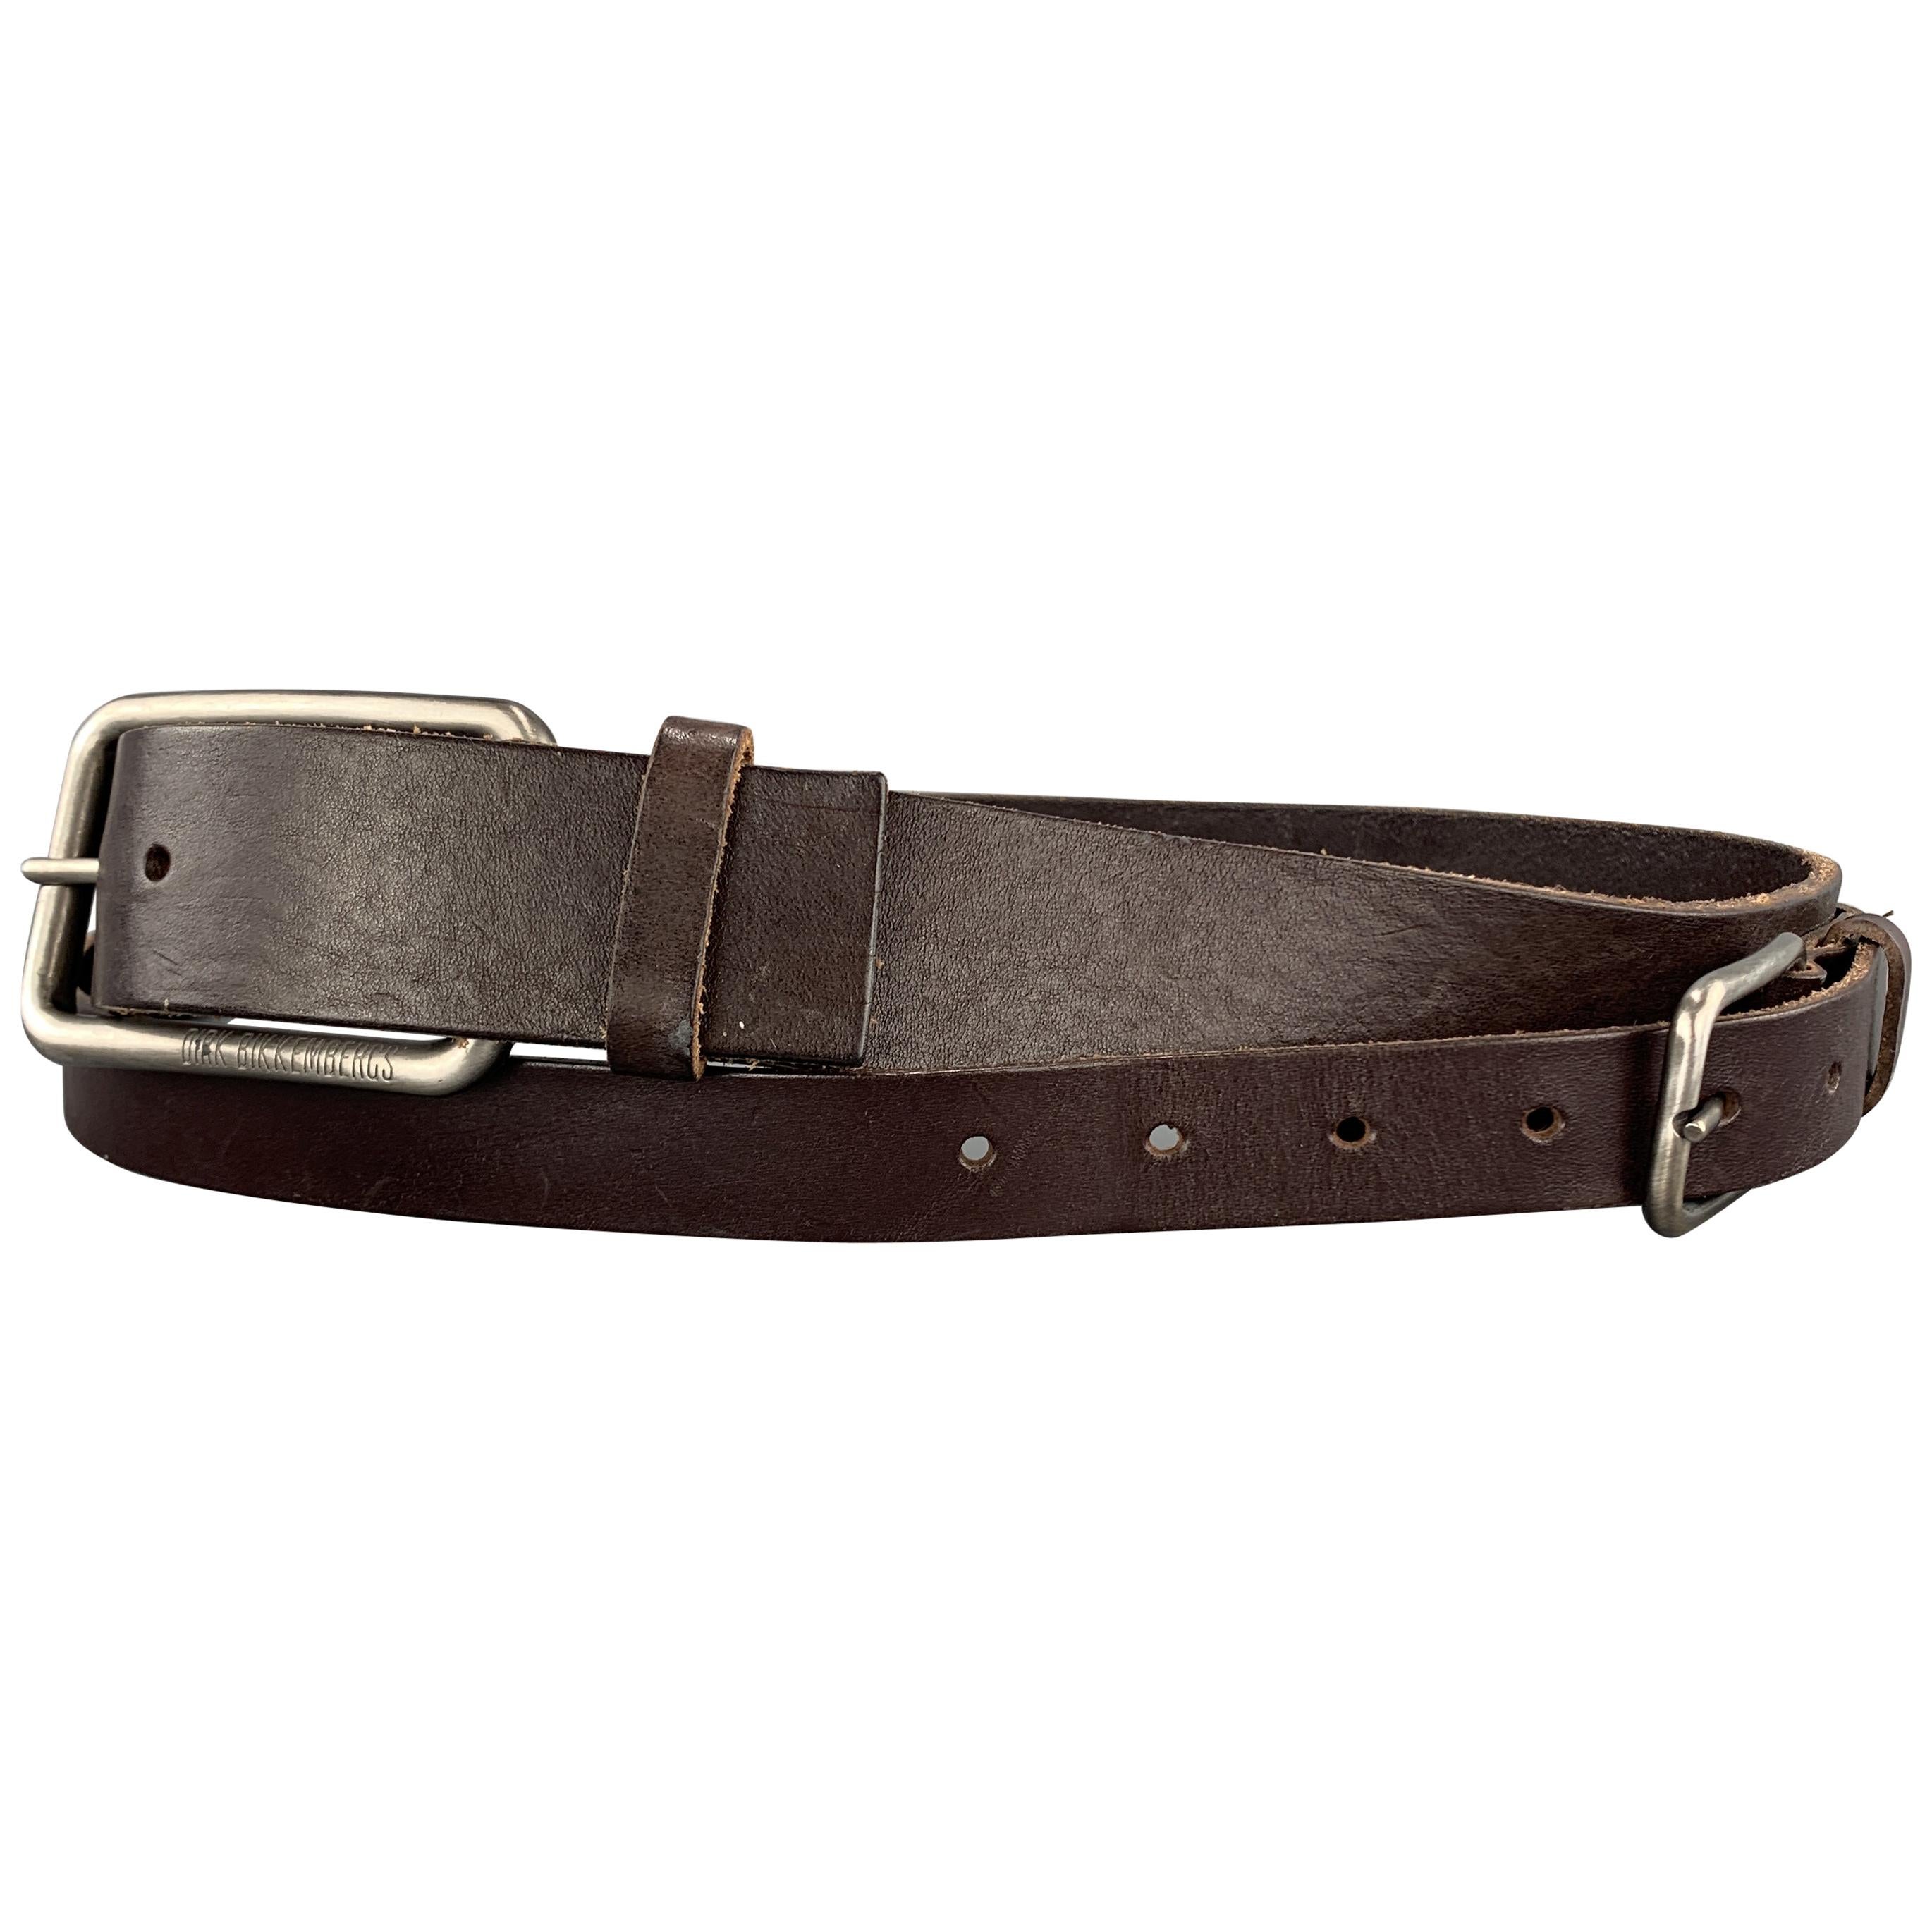 DIRK BIKKEMBERGS Size 32 Brown Leather Double Strap Layered Belt